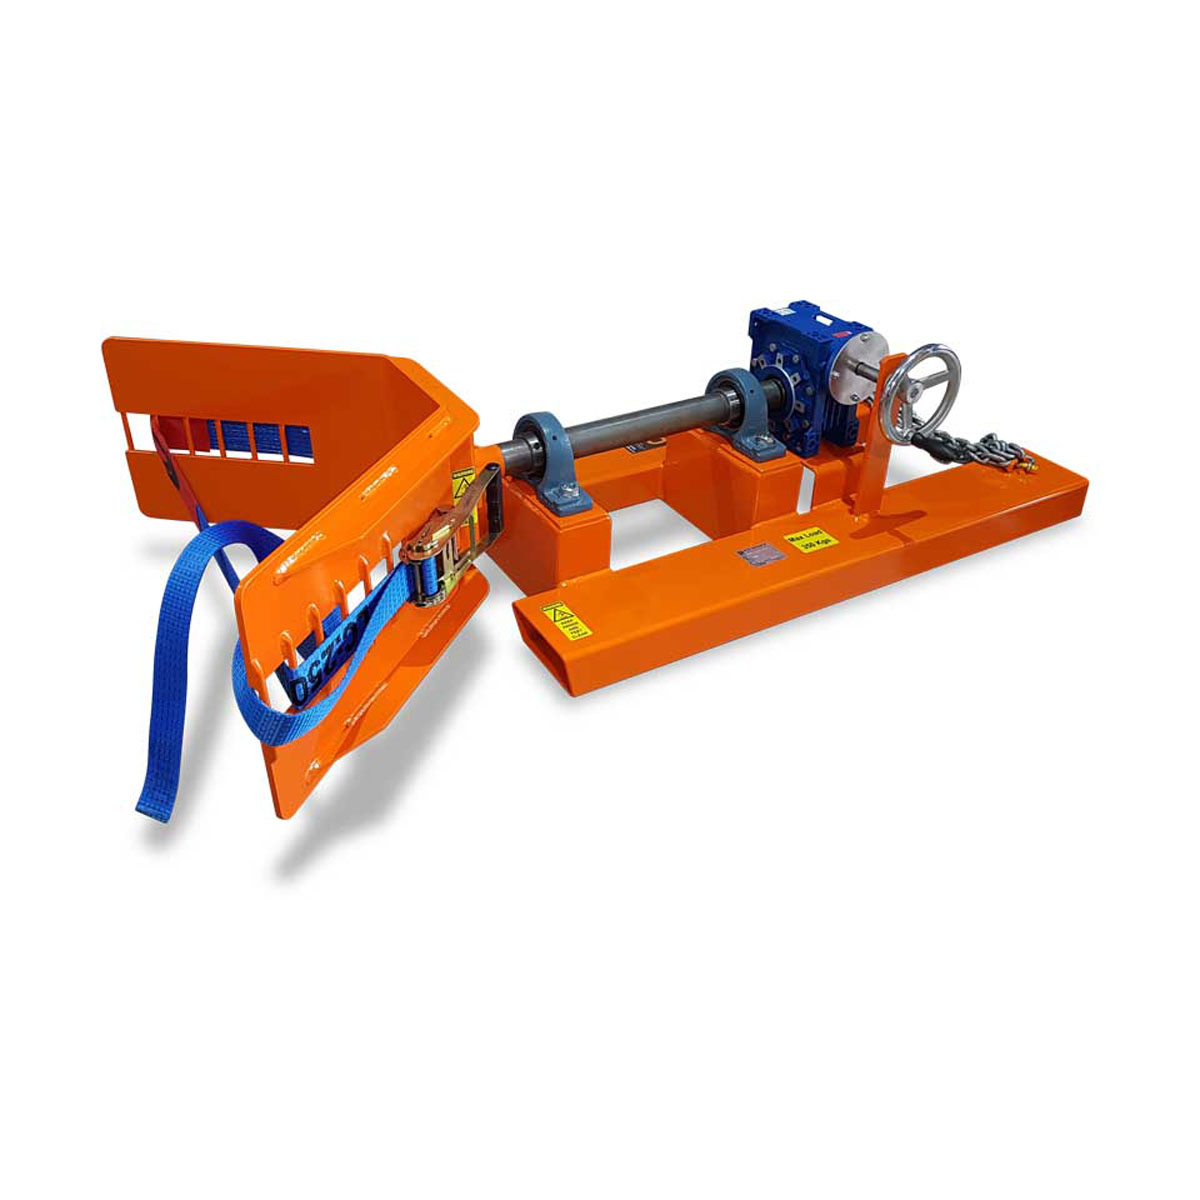 Buy Roll Rotator Forklift Attachment in Forklift Attachments from Astrolift NZ